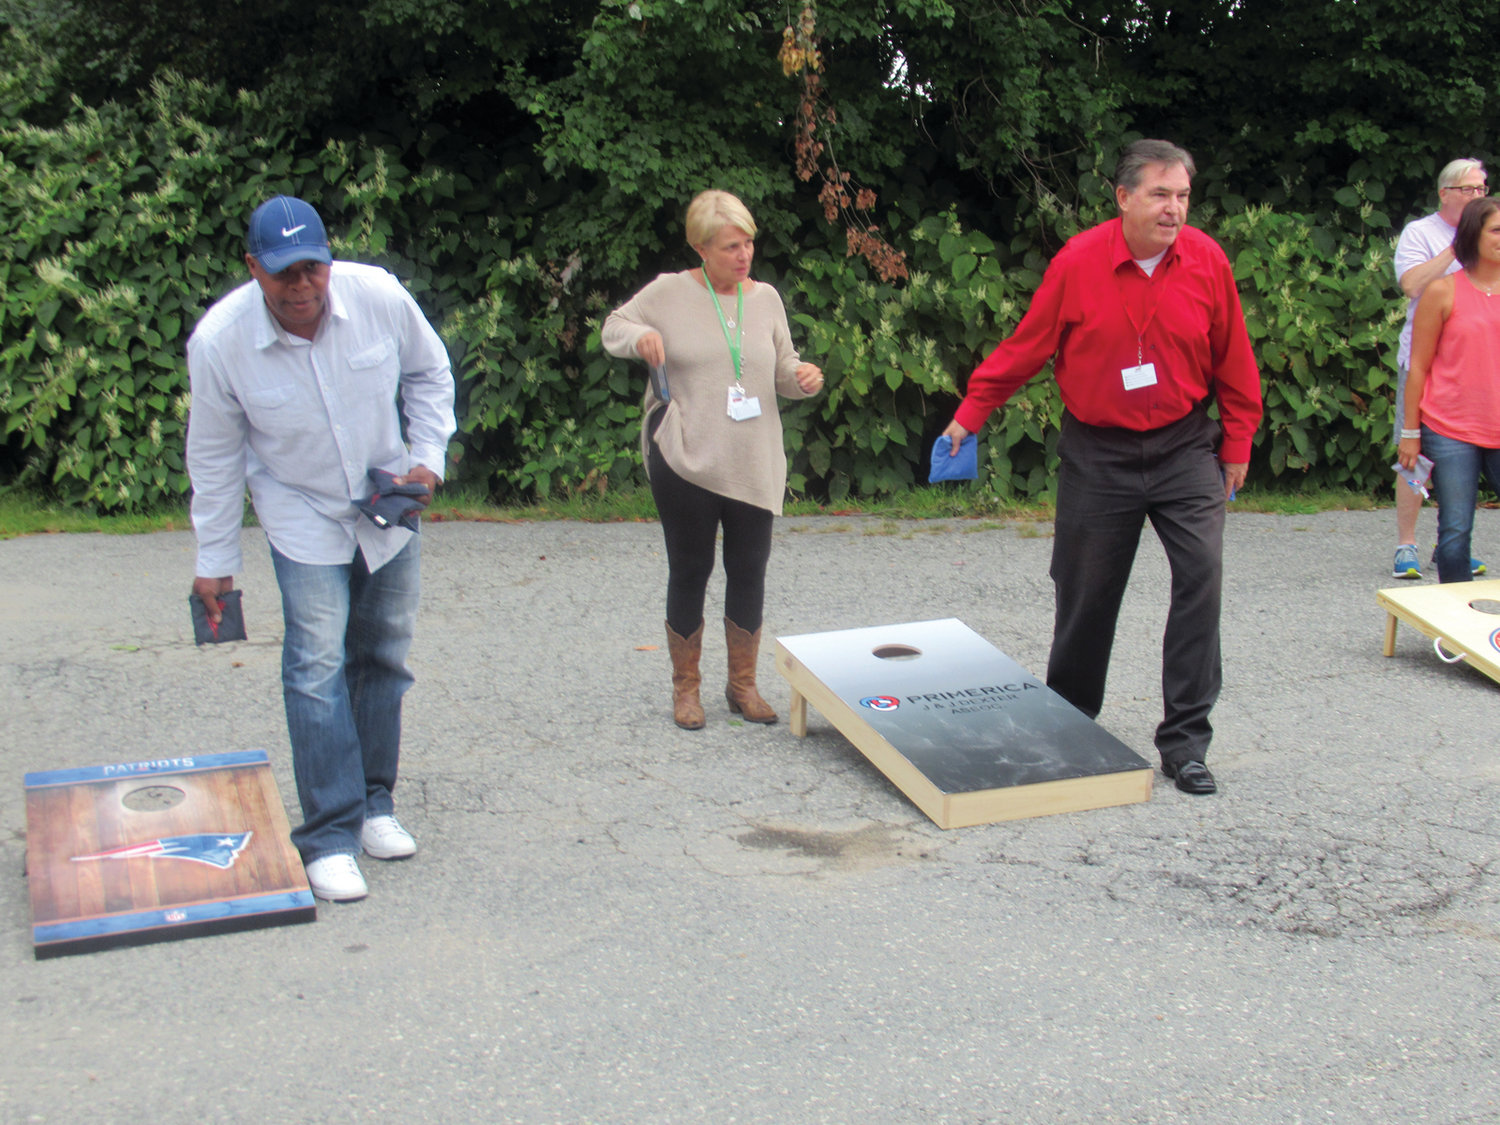 PROLIFIC PLAYERS: This was the scene earlier this month at Cranston-based Gentry Moving & Storage as a Cornhole Elimination Tournament raised $1,400 for the nonprofit TLC4LTC.